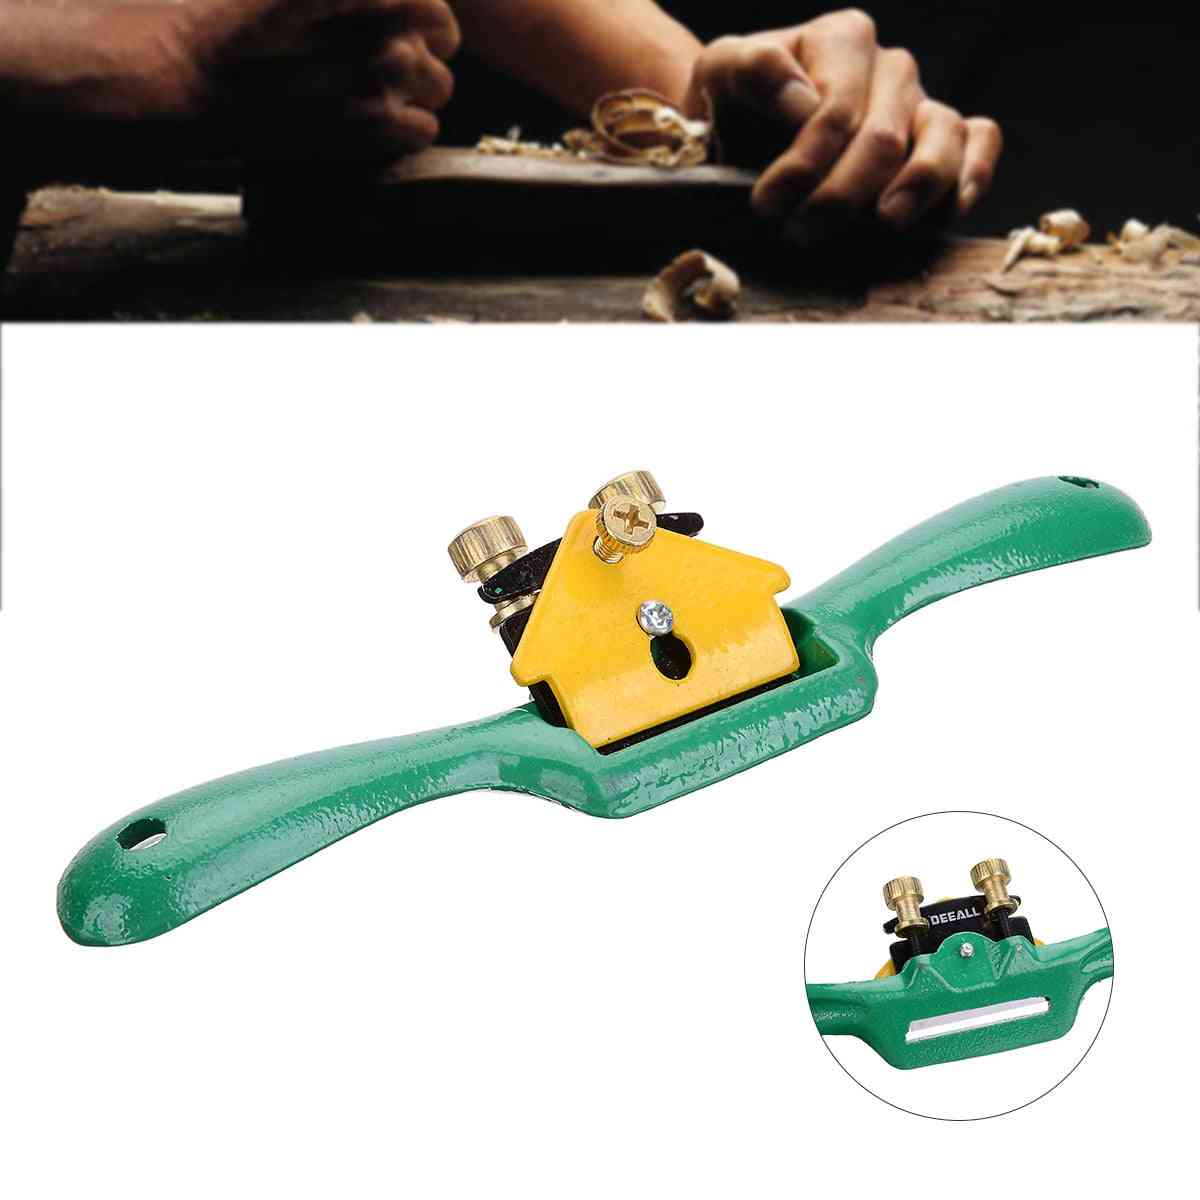 Iron Spoke Shave Plane Metal Cutting Edge Wood Shaping For Woodworking Machinery